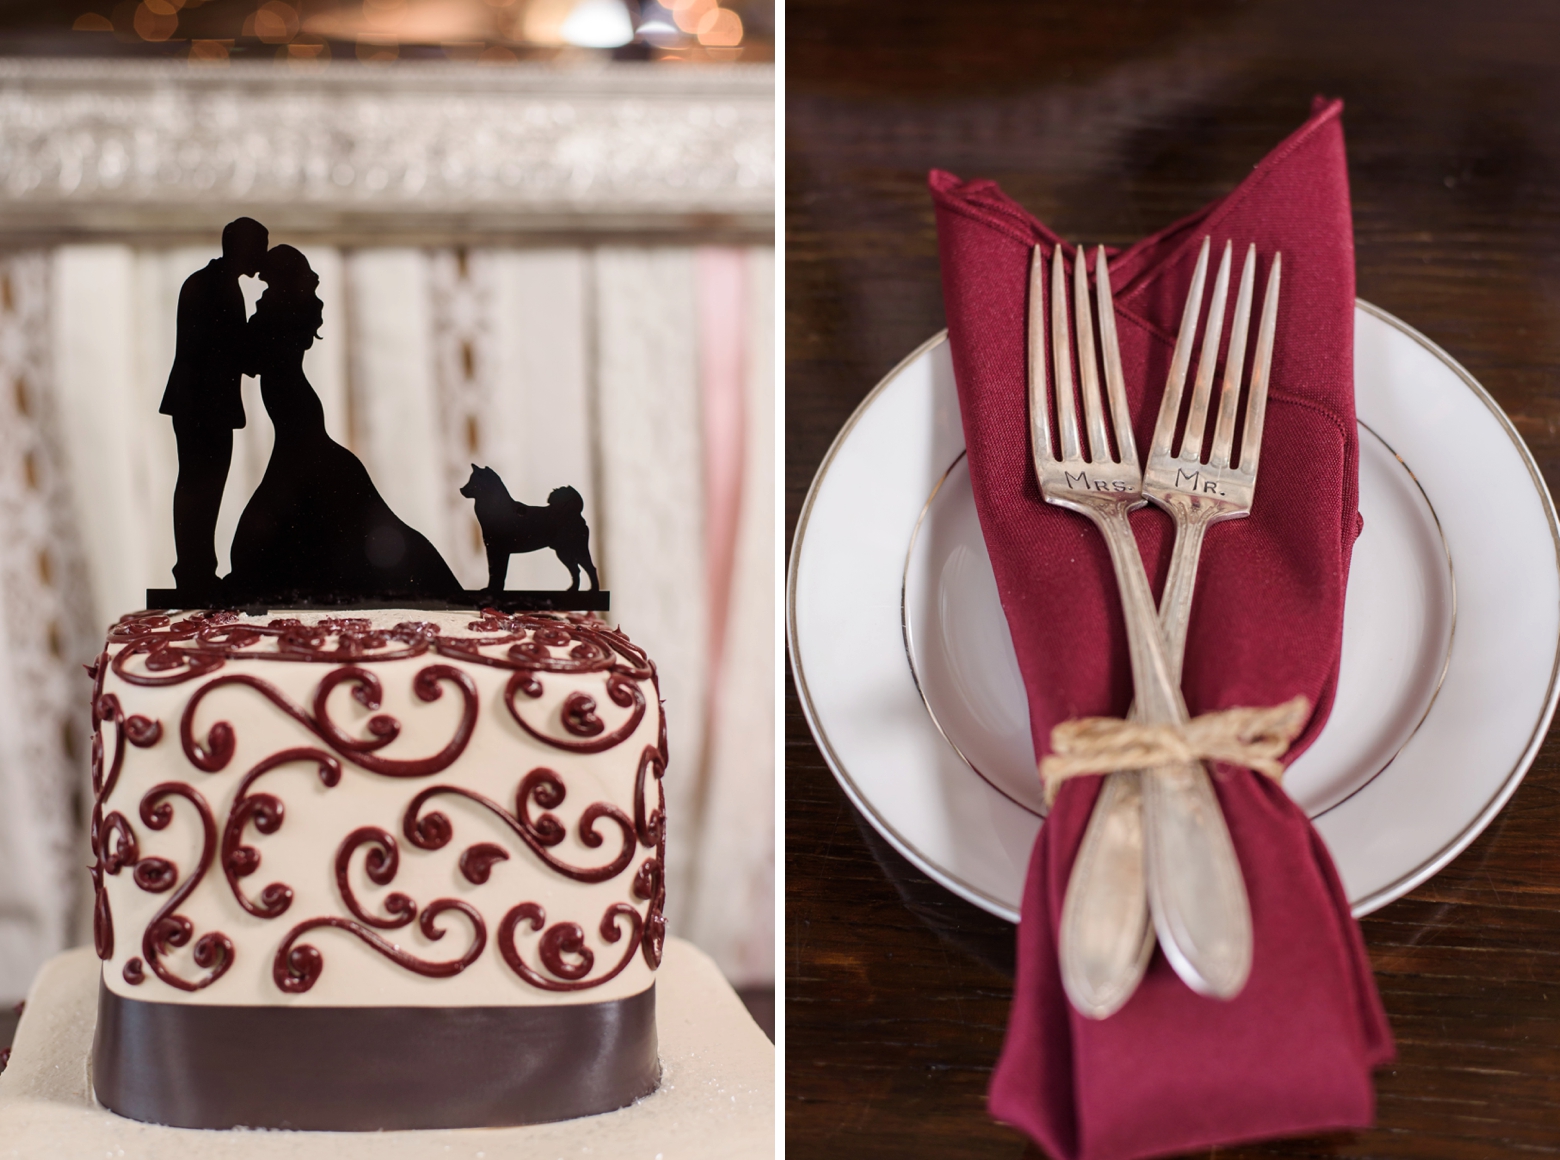 The wedding cake and topper featuring a silhouette of the Bride and Groom and their dog